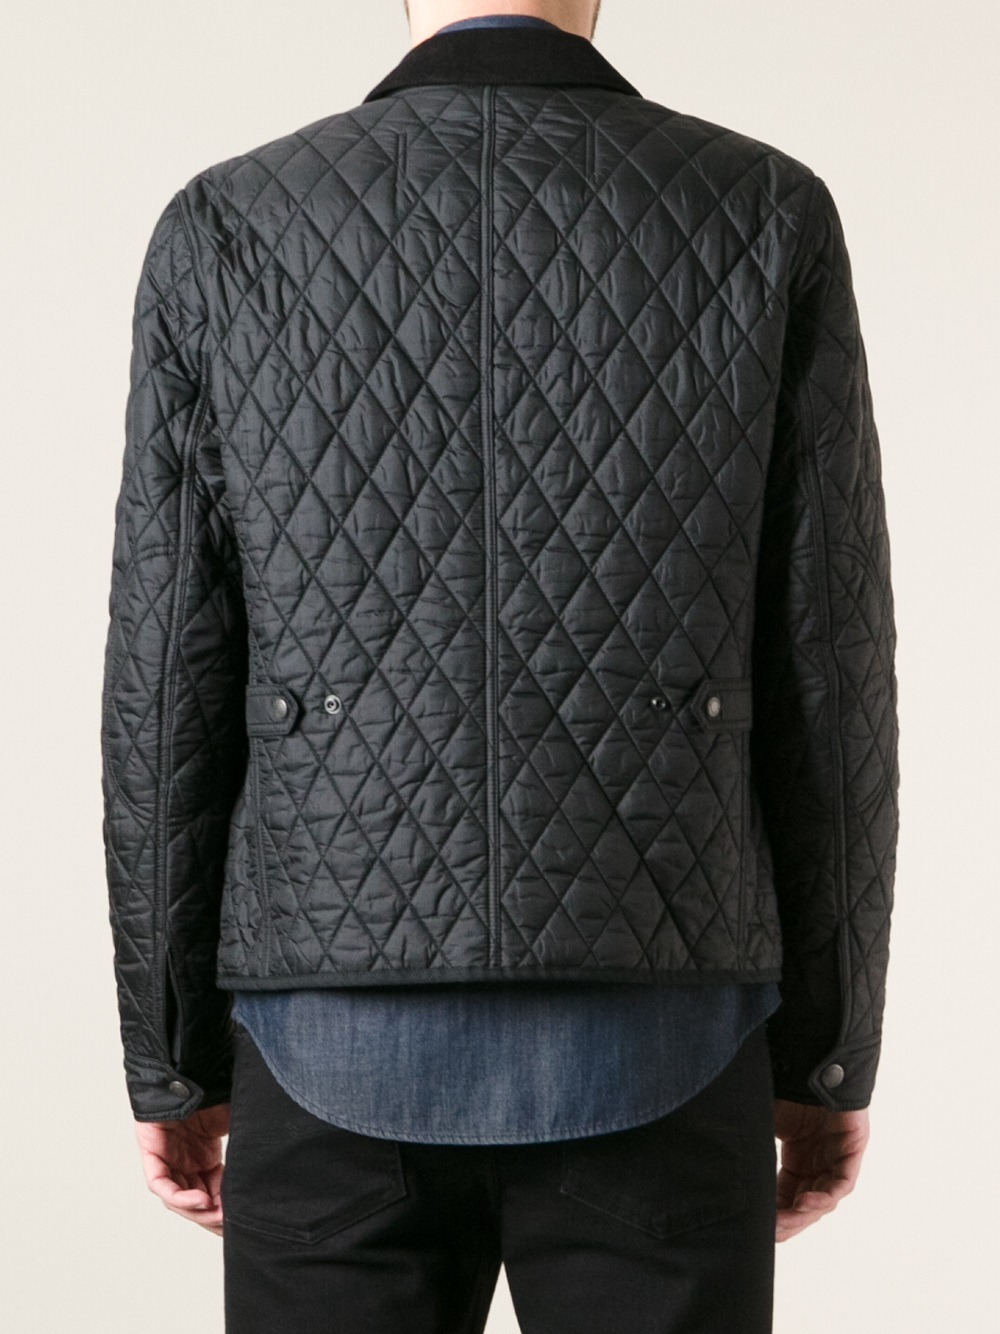 Lyst - Burberry Brit Quilted Jacket in Black for Men